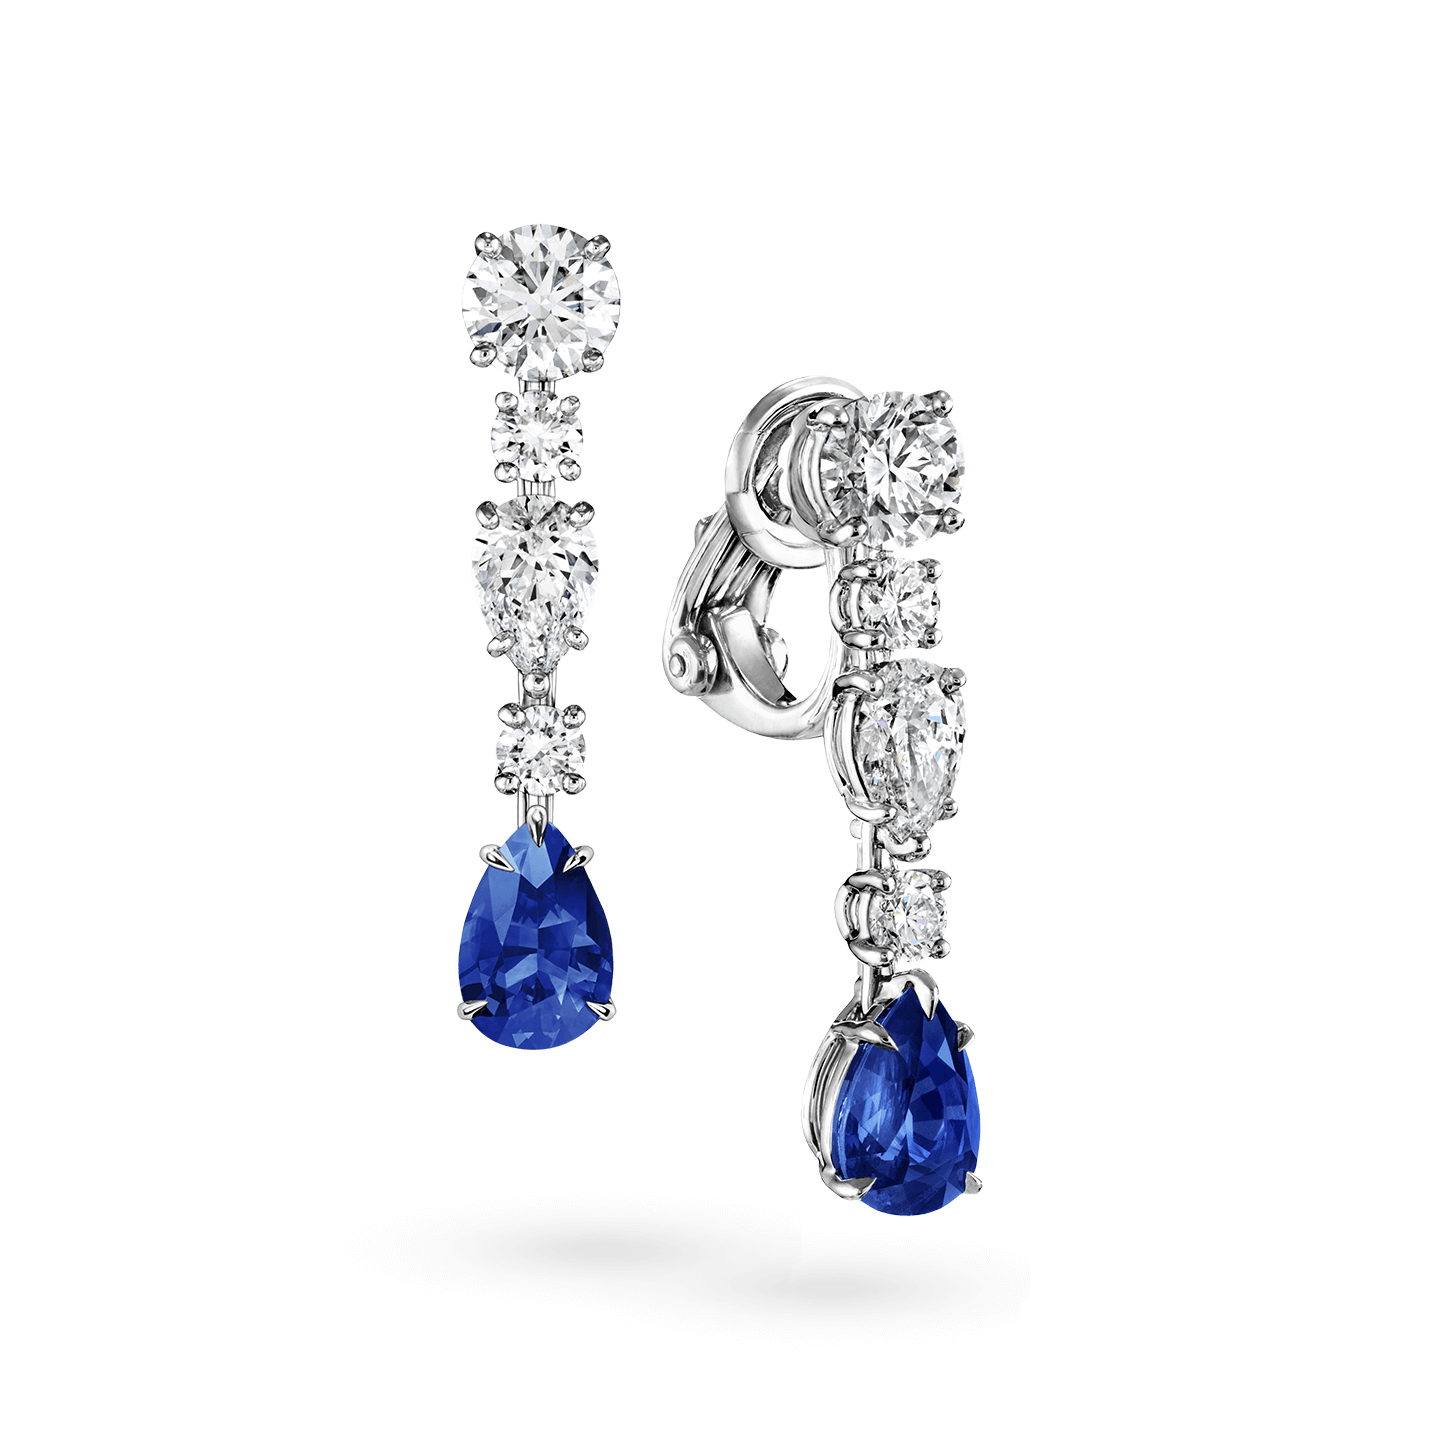 Diamond and Sapphire Drop Earrings, Product Image 2